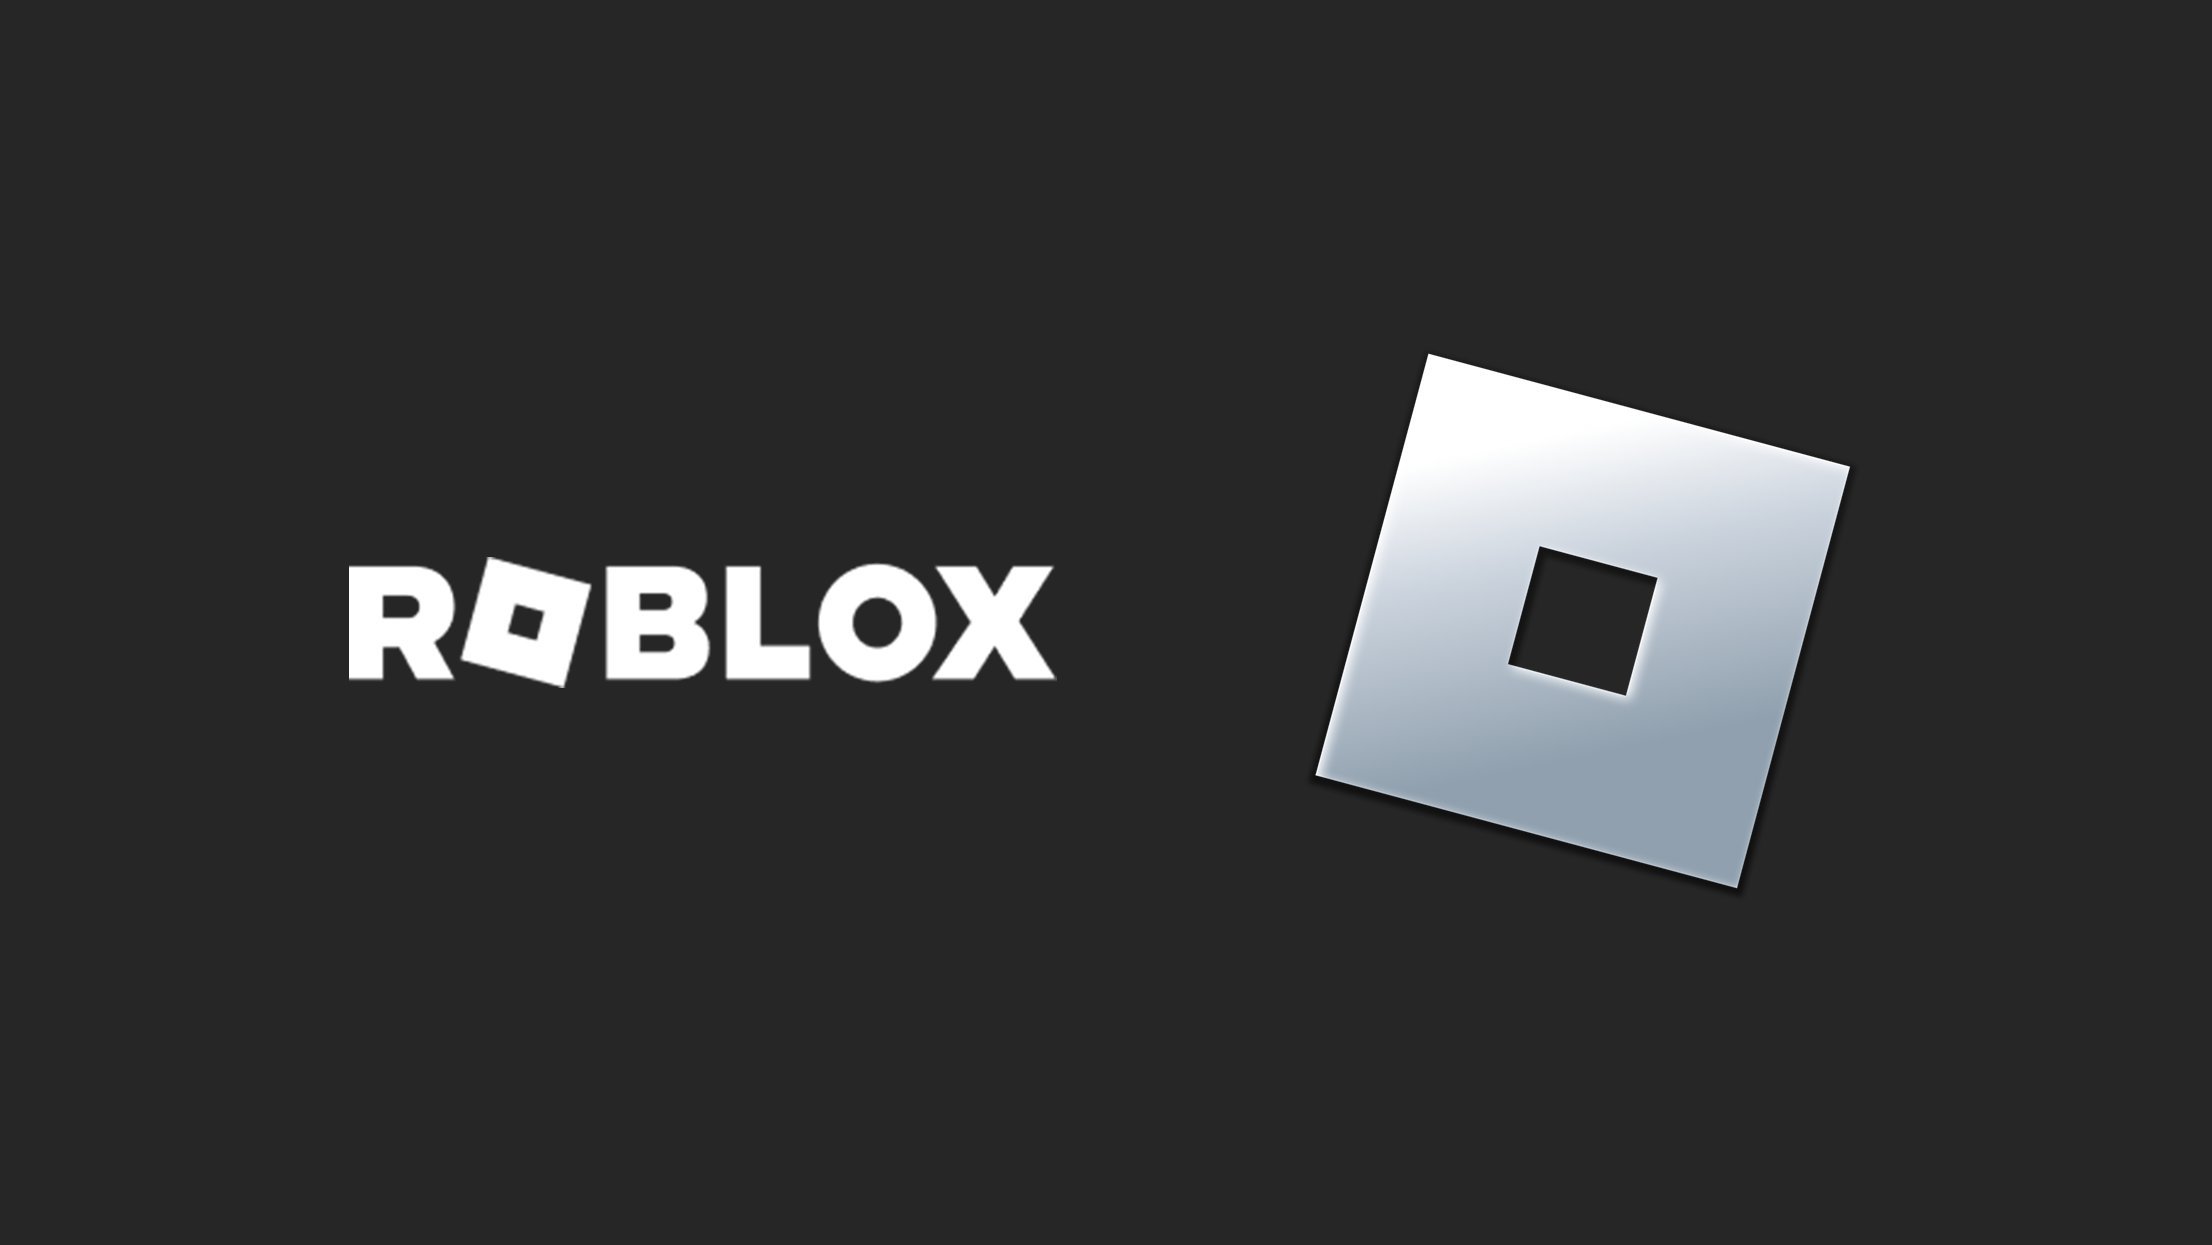 EventHunters - Roblox News on X: . @Roblox stop it now and revert this new  logo.. we don't want it  / X